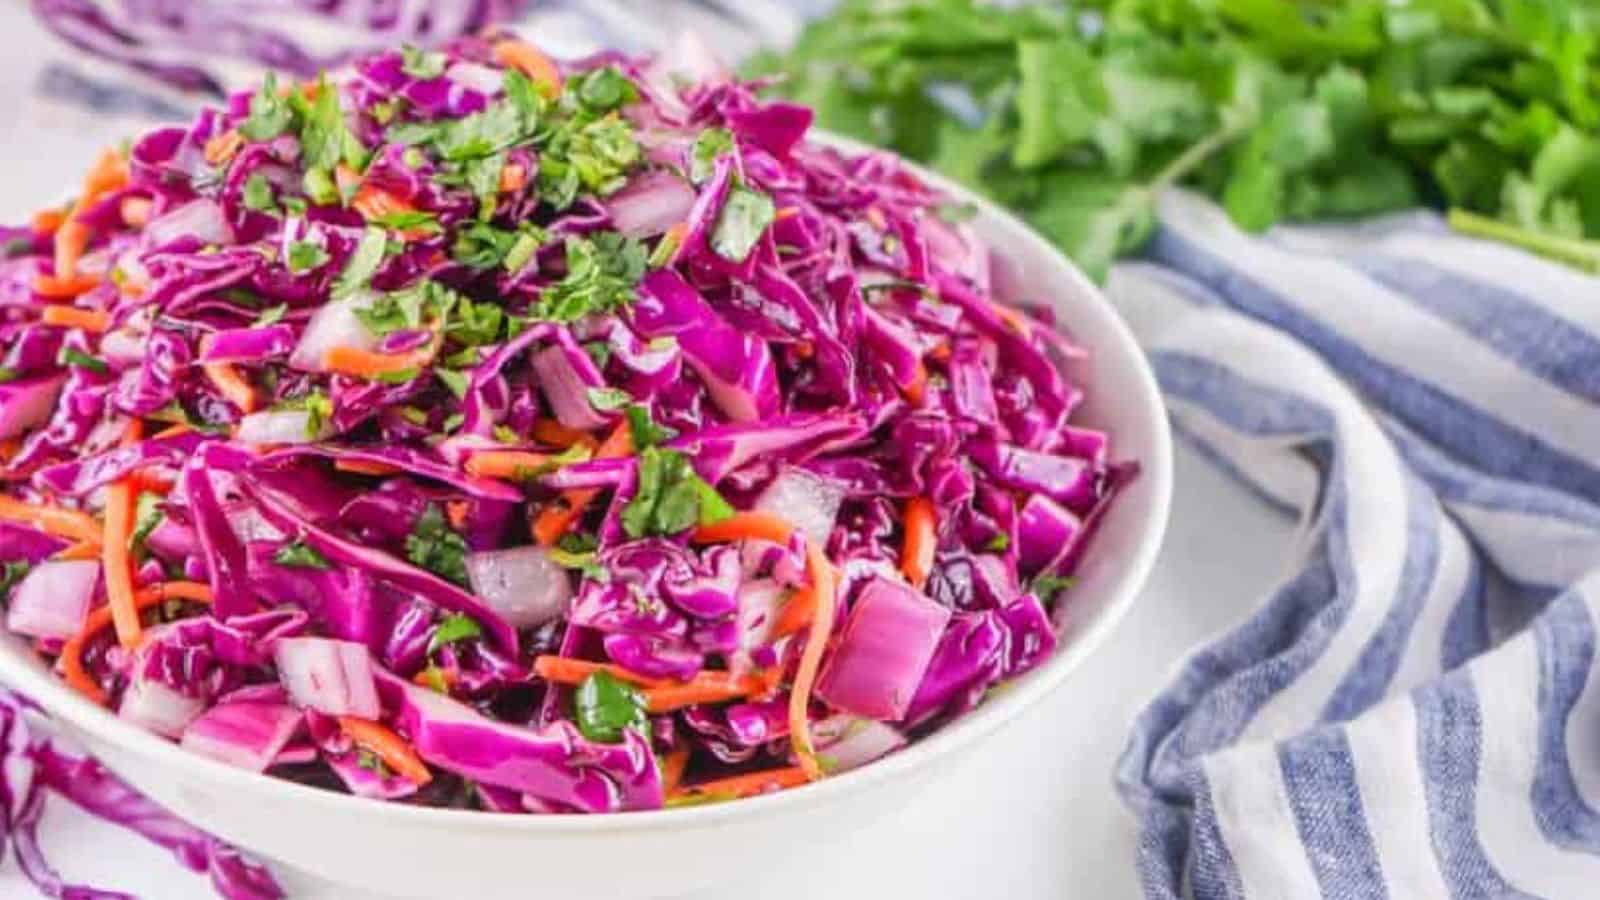 A bowl of fresh red cabbage coleslaw garnished with herbs.